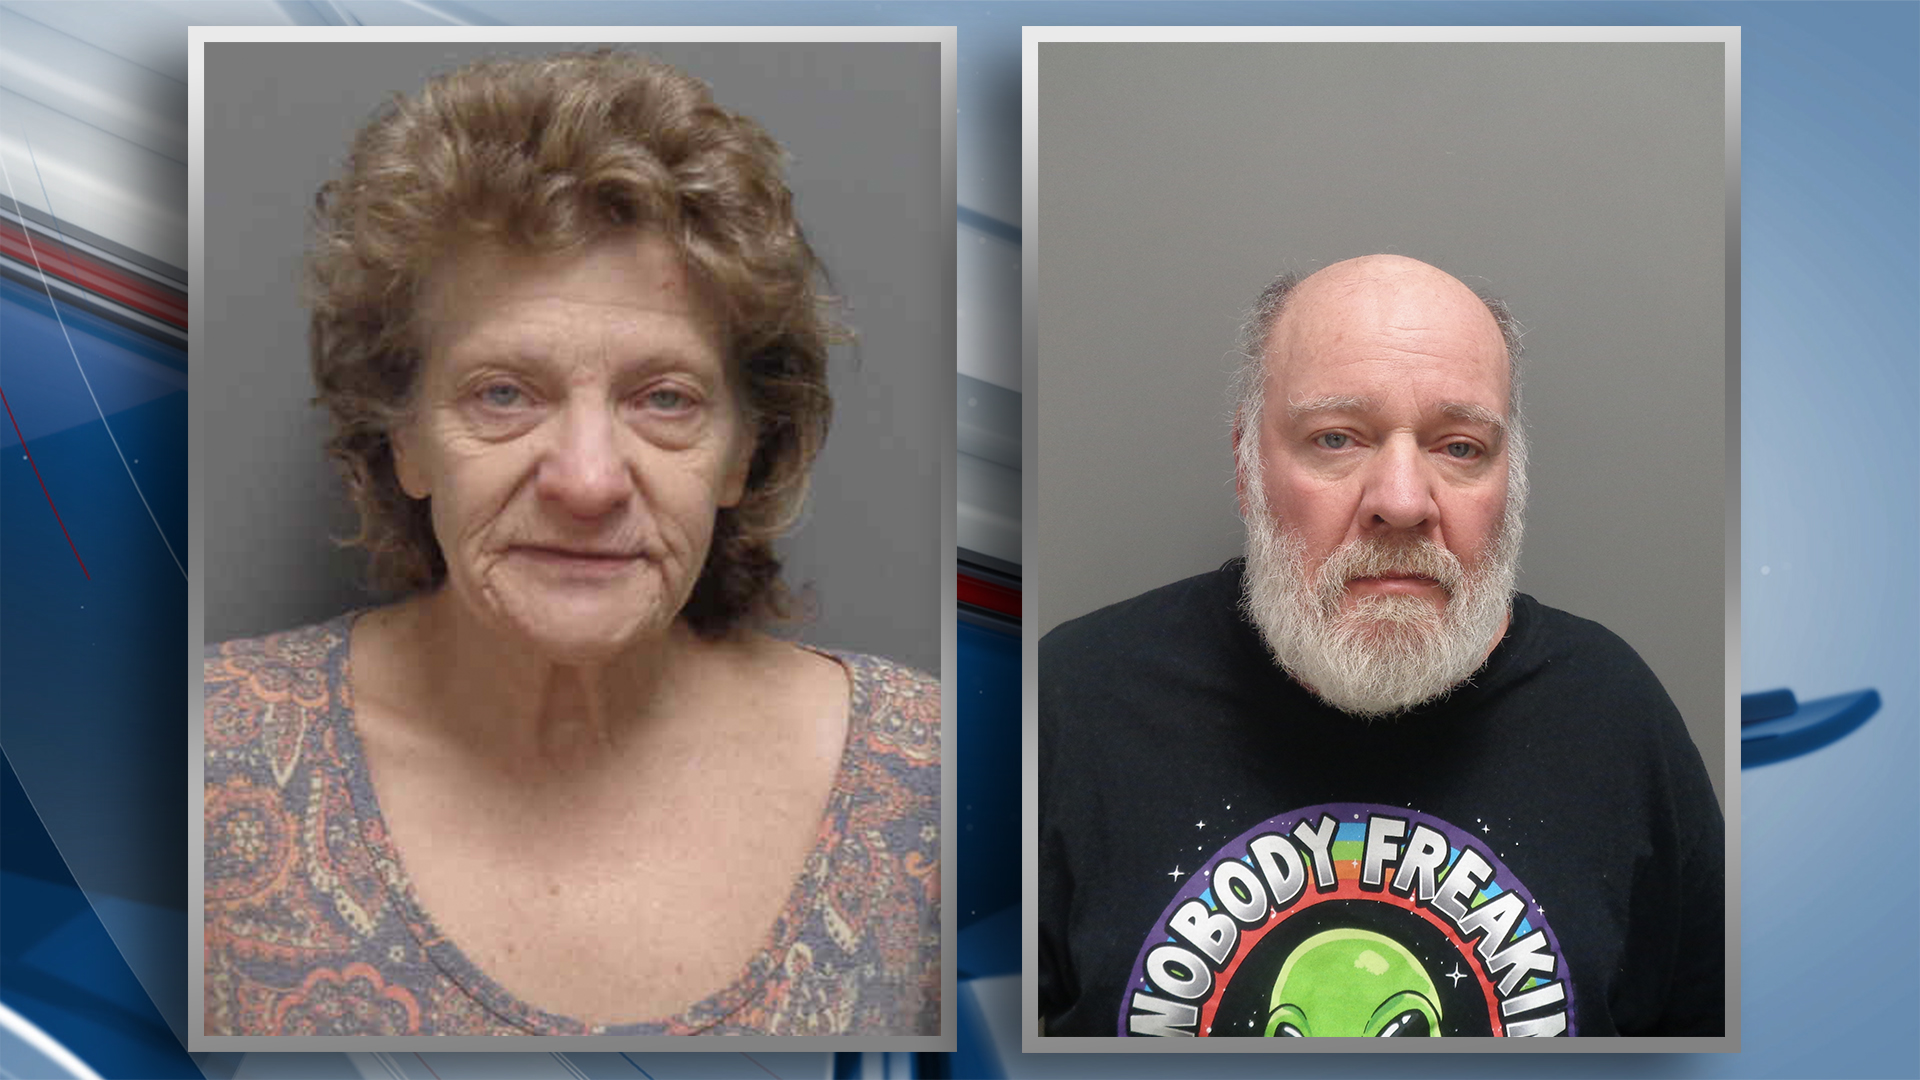 Montrose couple arrested on drug charges in Lee County, Iowa